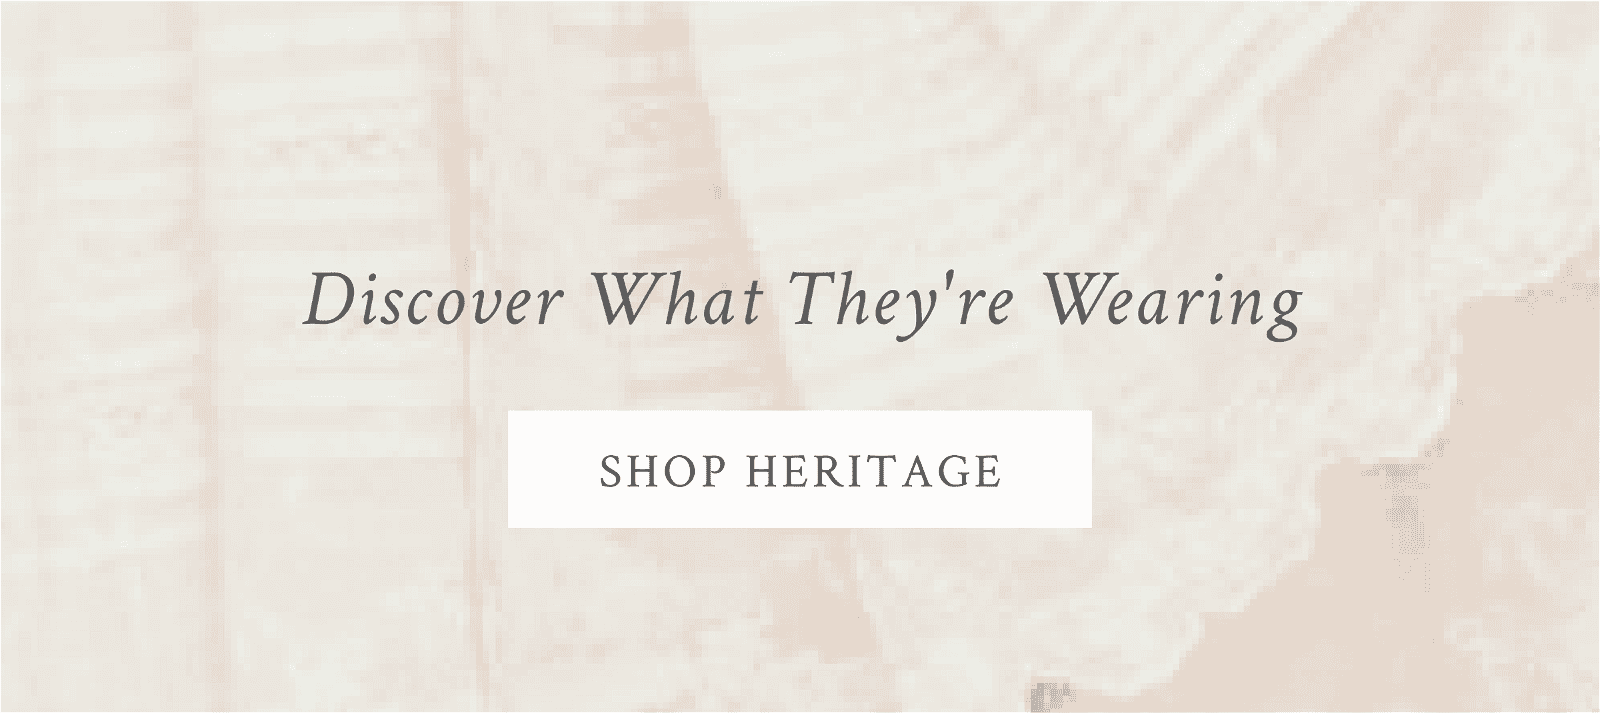 Discover what they're wearing. Shop heritage.